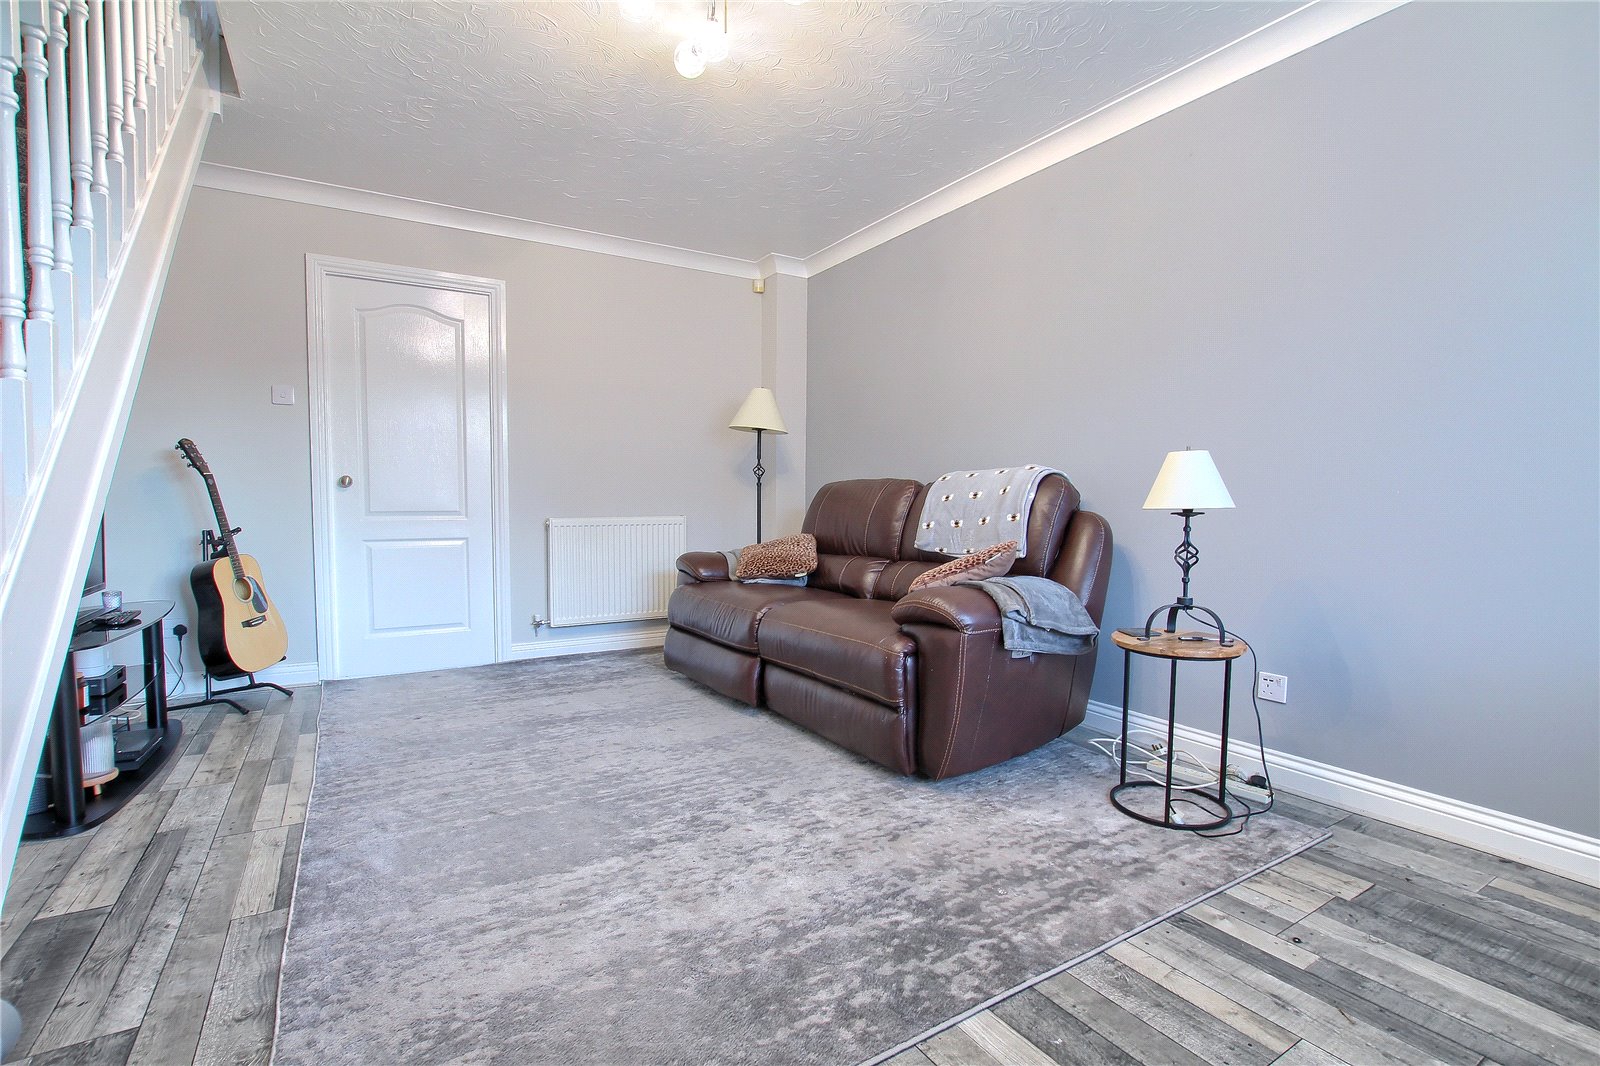 2 bed  for sale in Constable Grove, Wolviston Grange  - Property Image 2